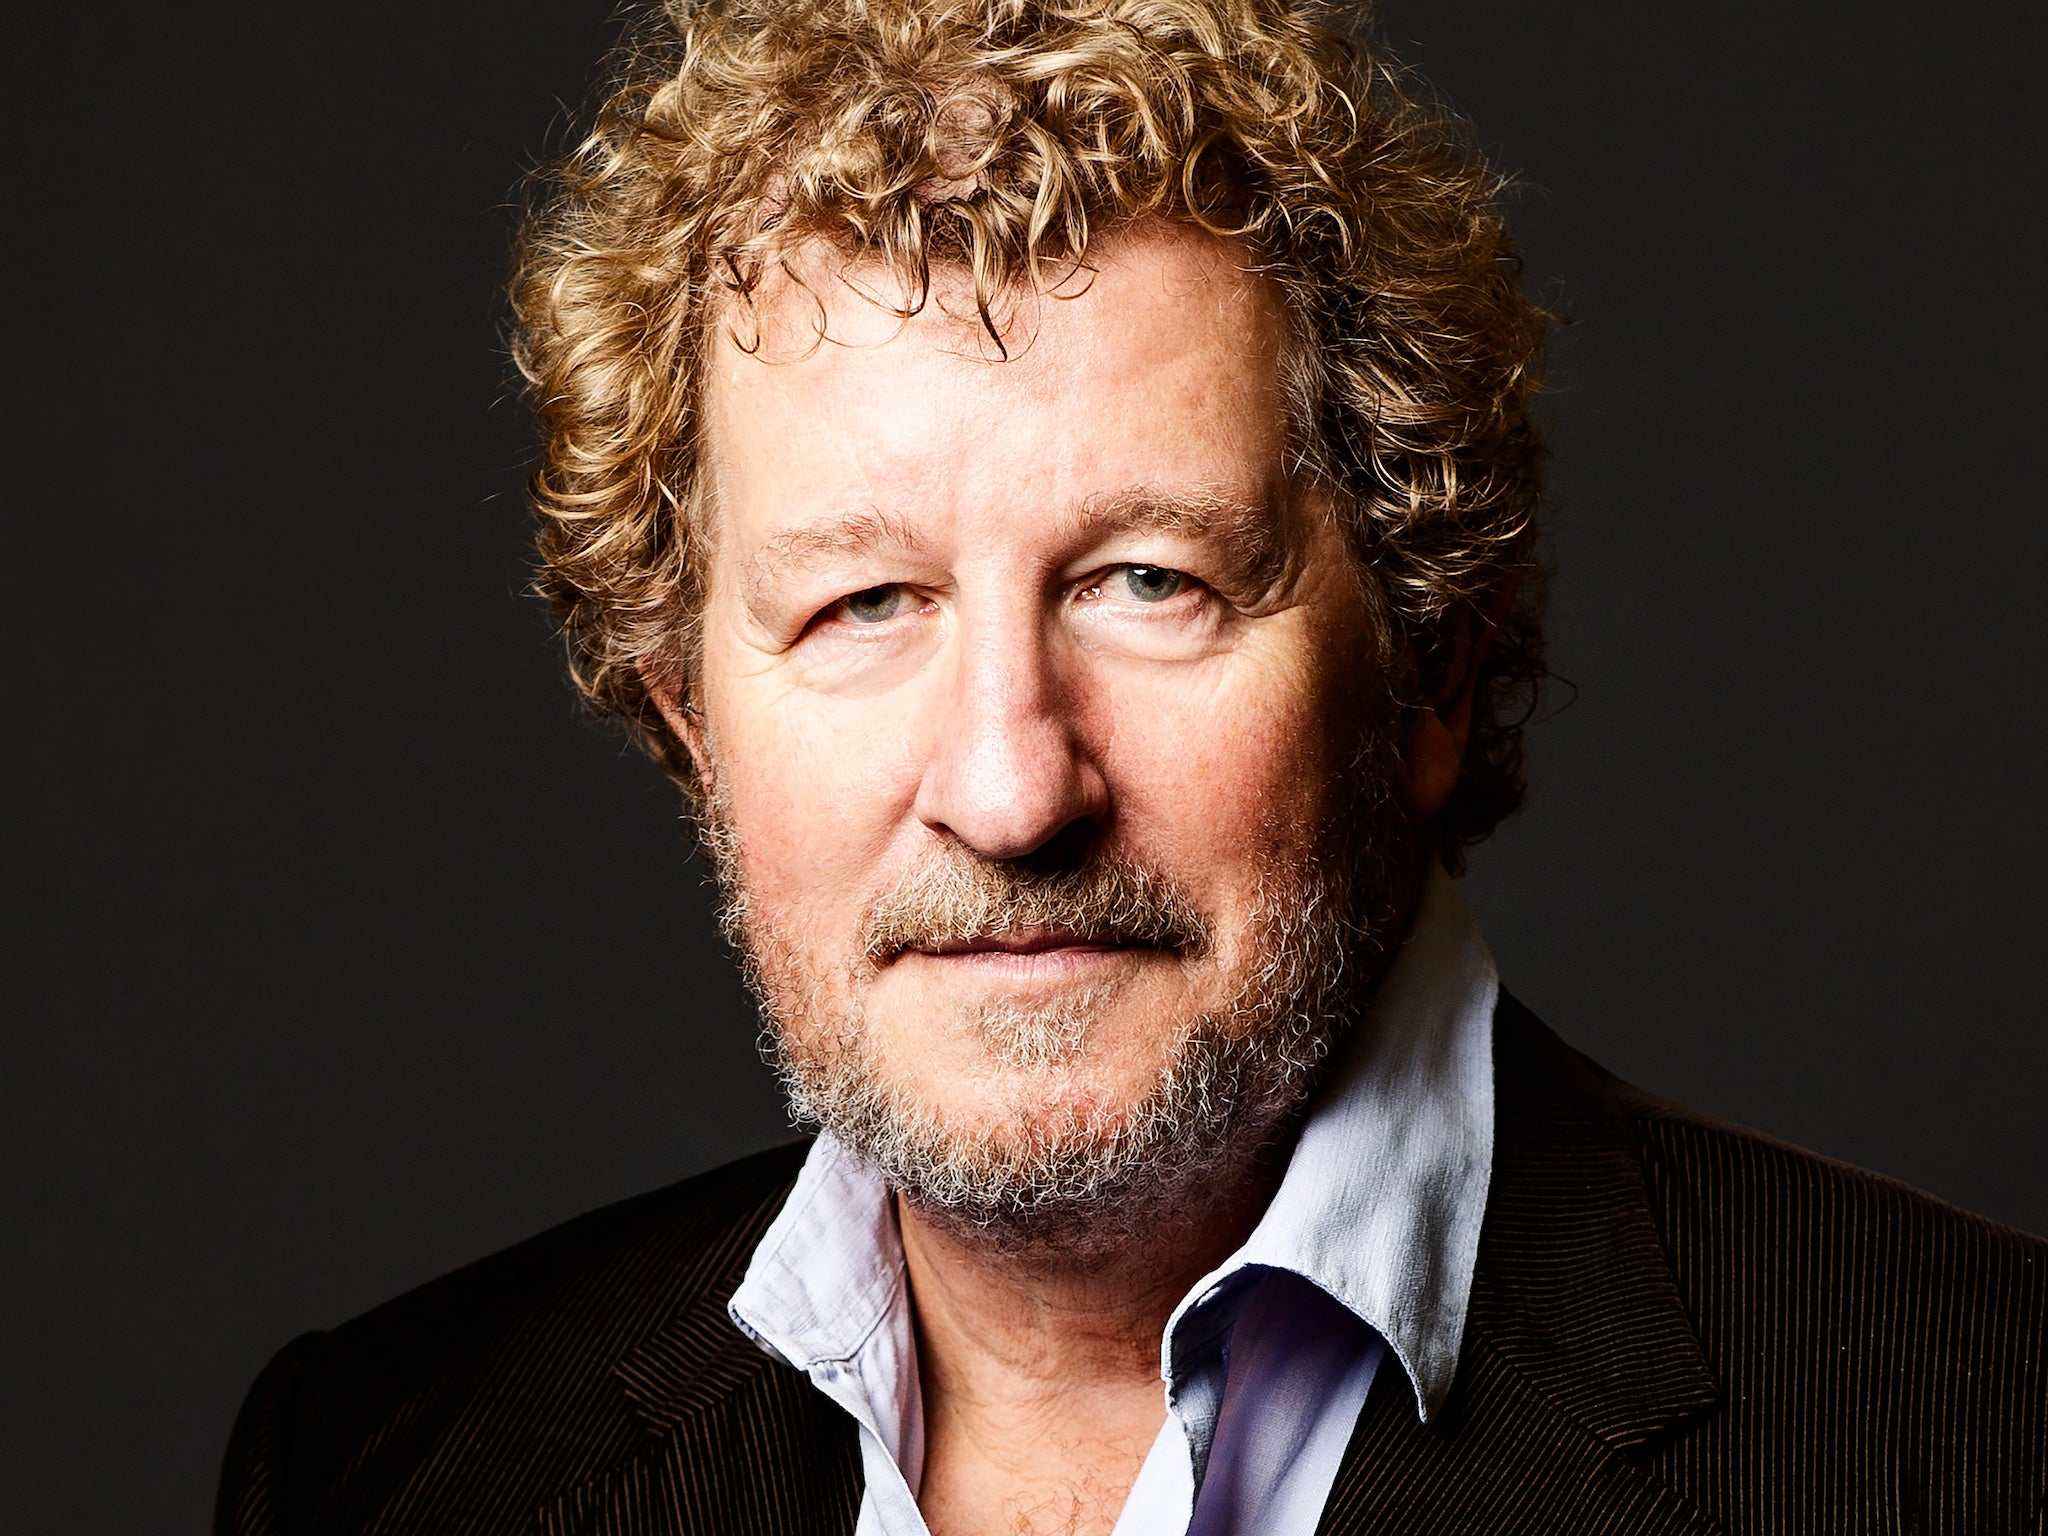 Sebastian Faulks is due to release his 16th novel ‘The Seventh Son’